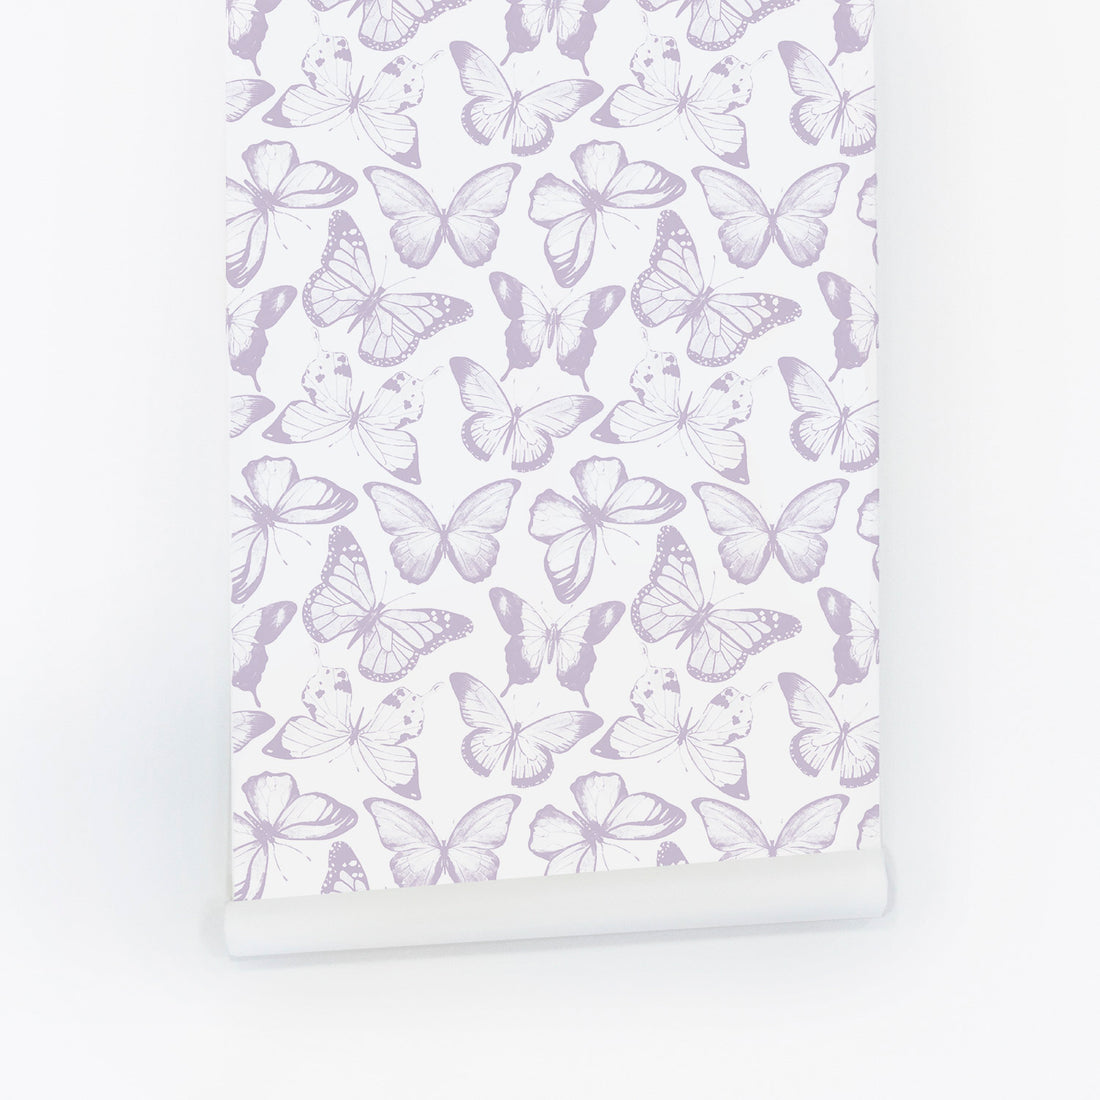 Watercolor butterfly wallpaper in lavender color for kids interiors